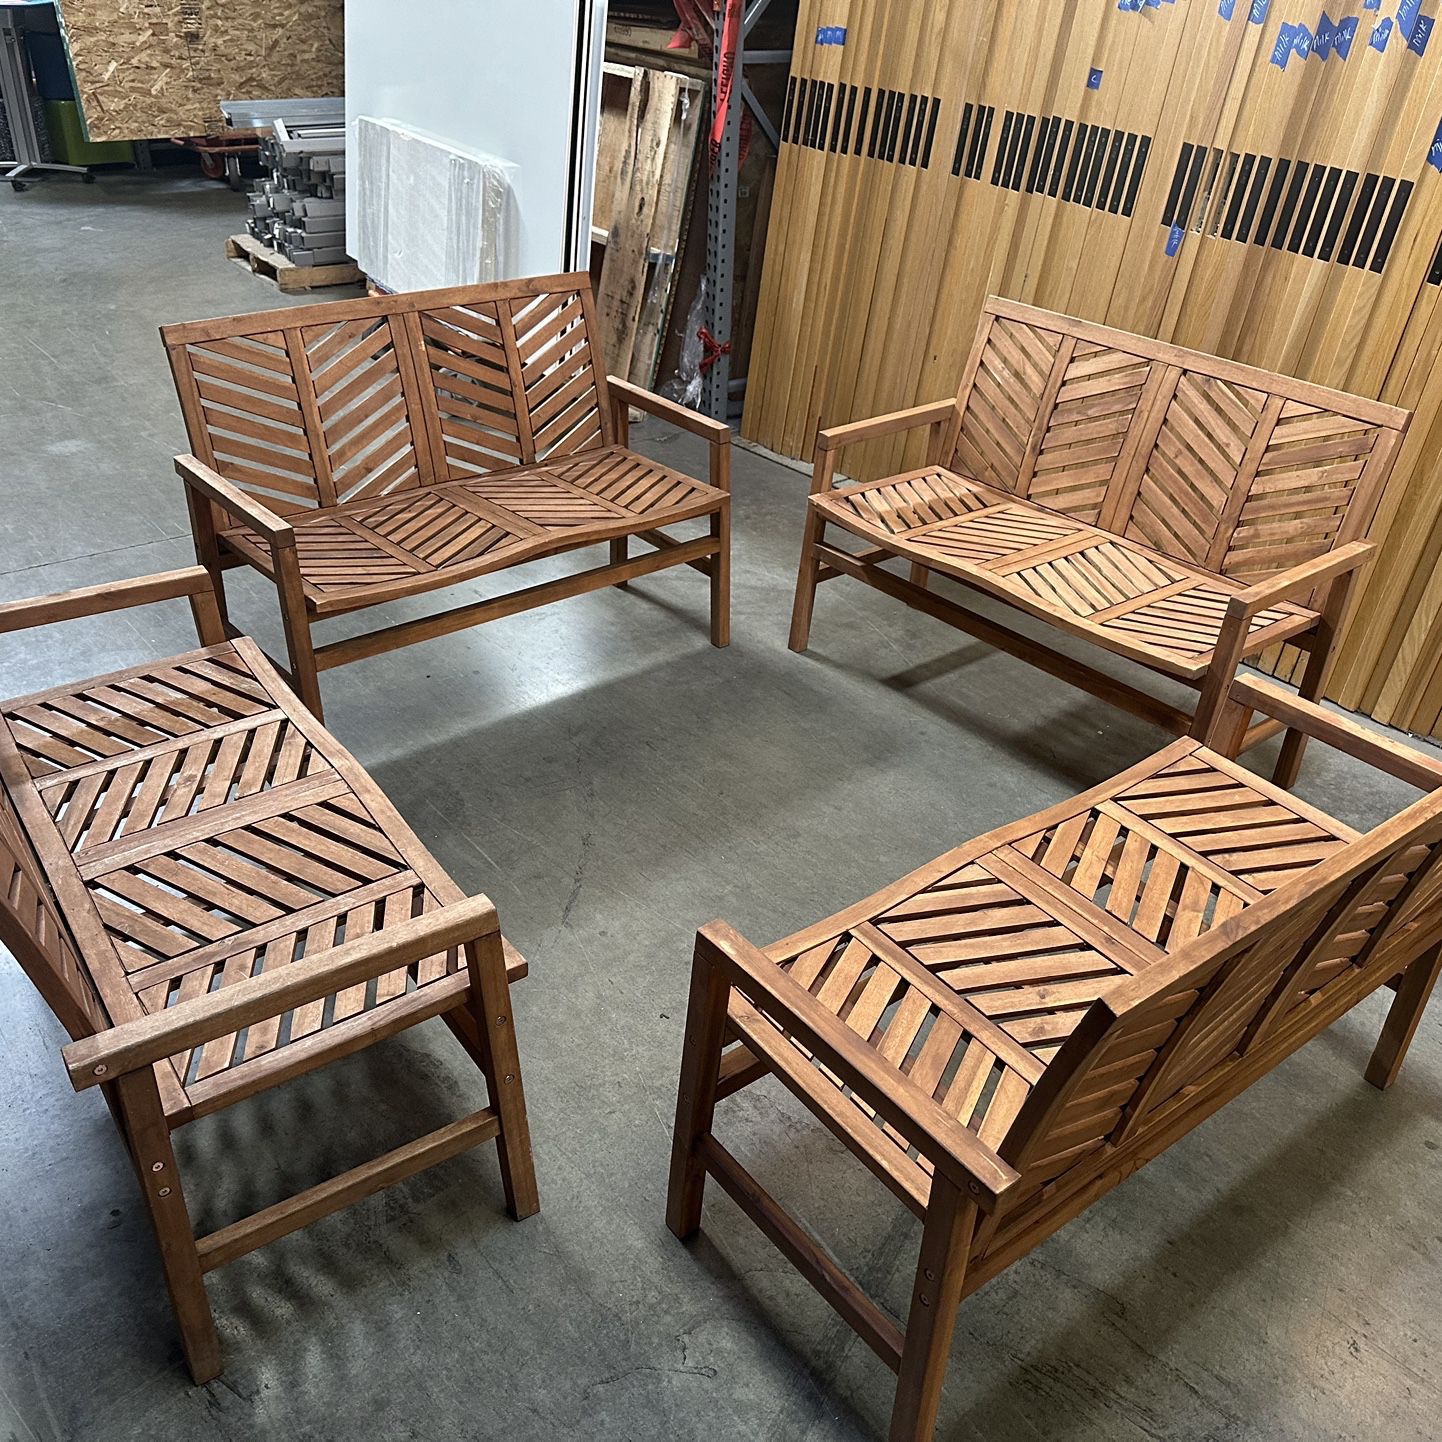 4 Outdoor Benches With Backs